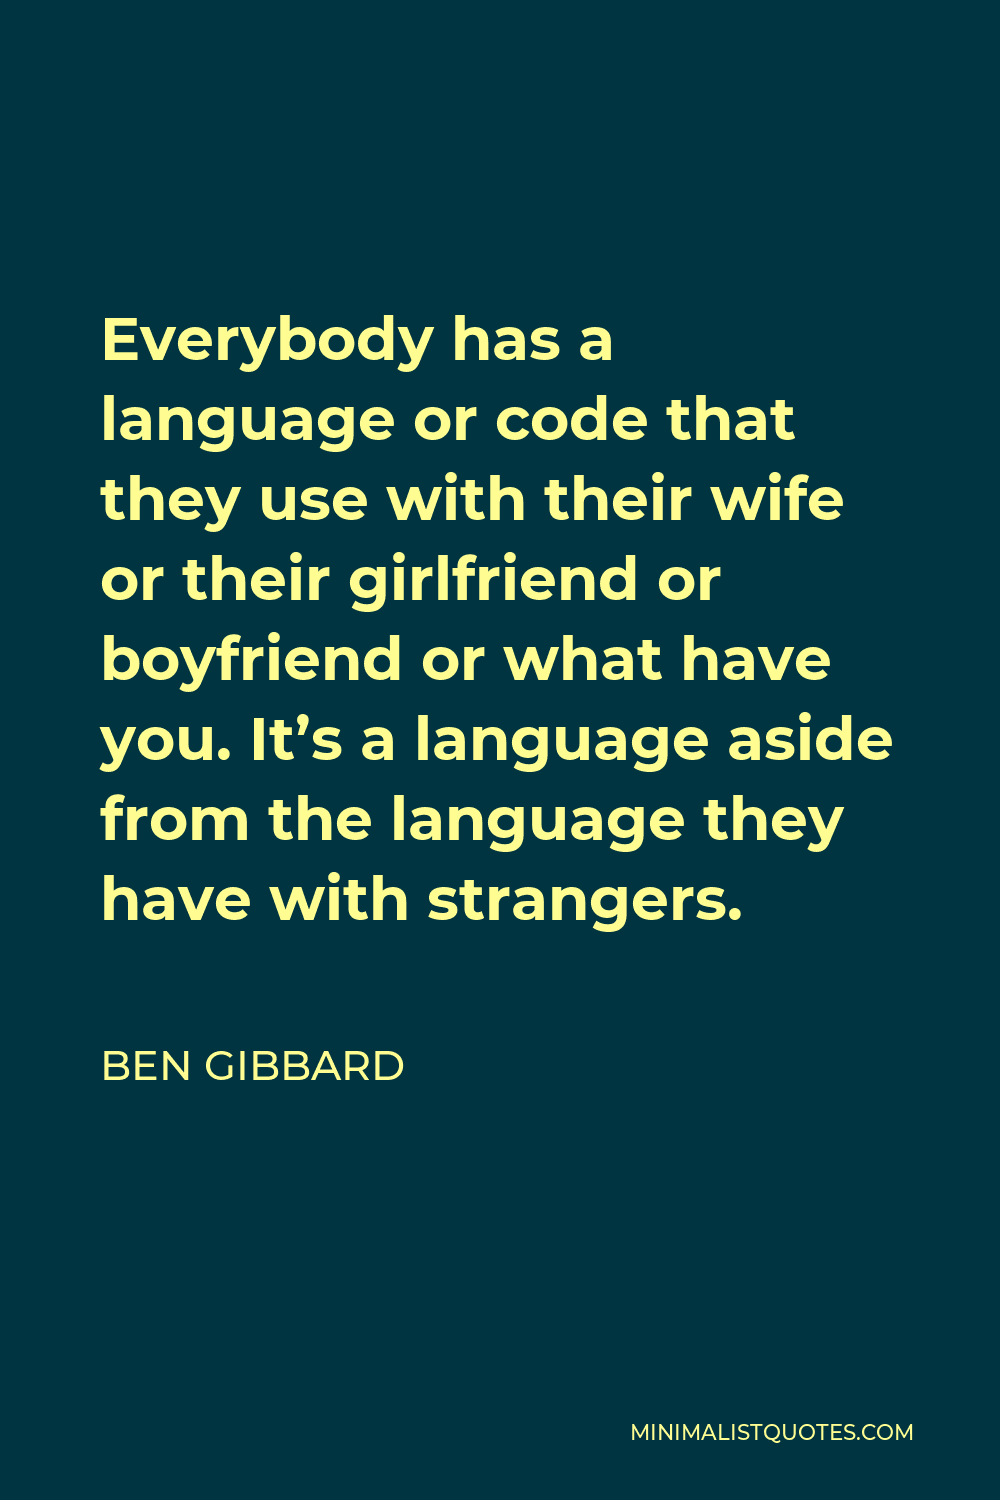 Ben Gibbard Quote - Everybody has a language or code that they use with their wife or their girlfriend or boyfriend or what have you. It’s a language aside from the language they have with strangers.